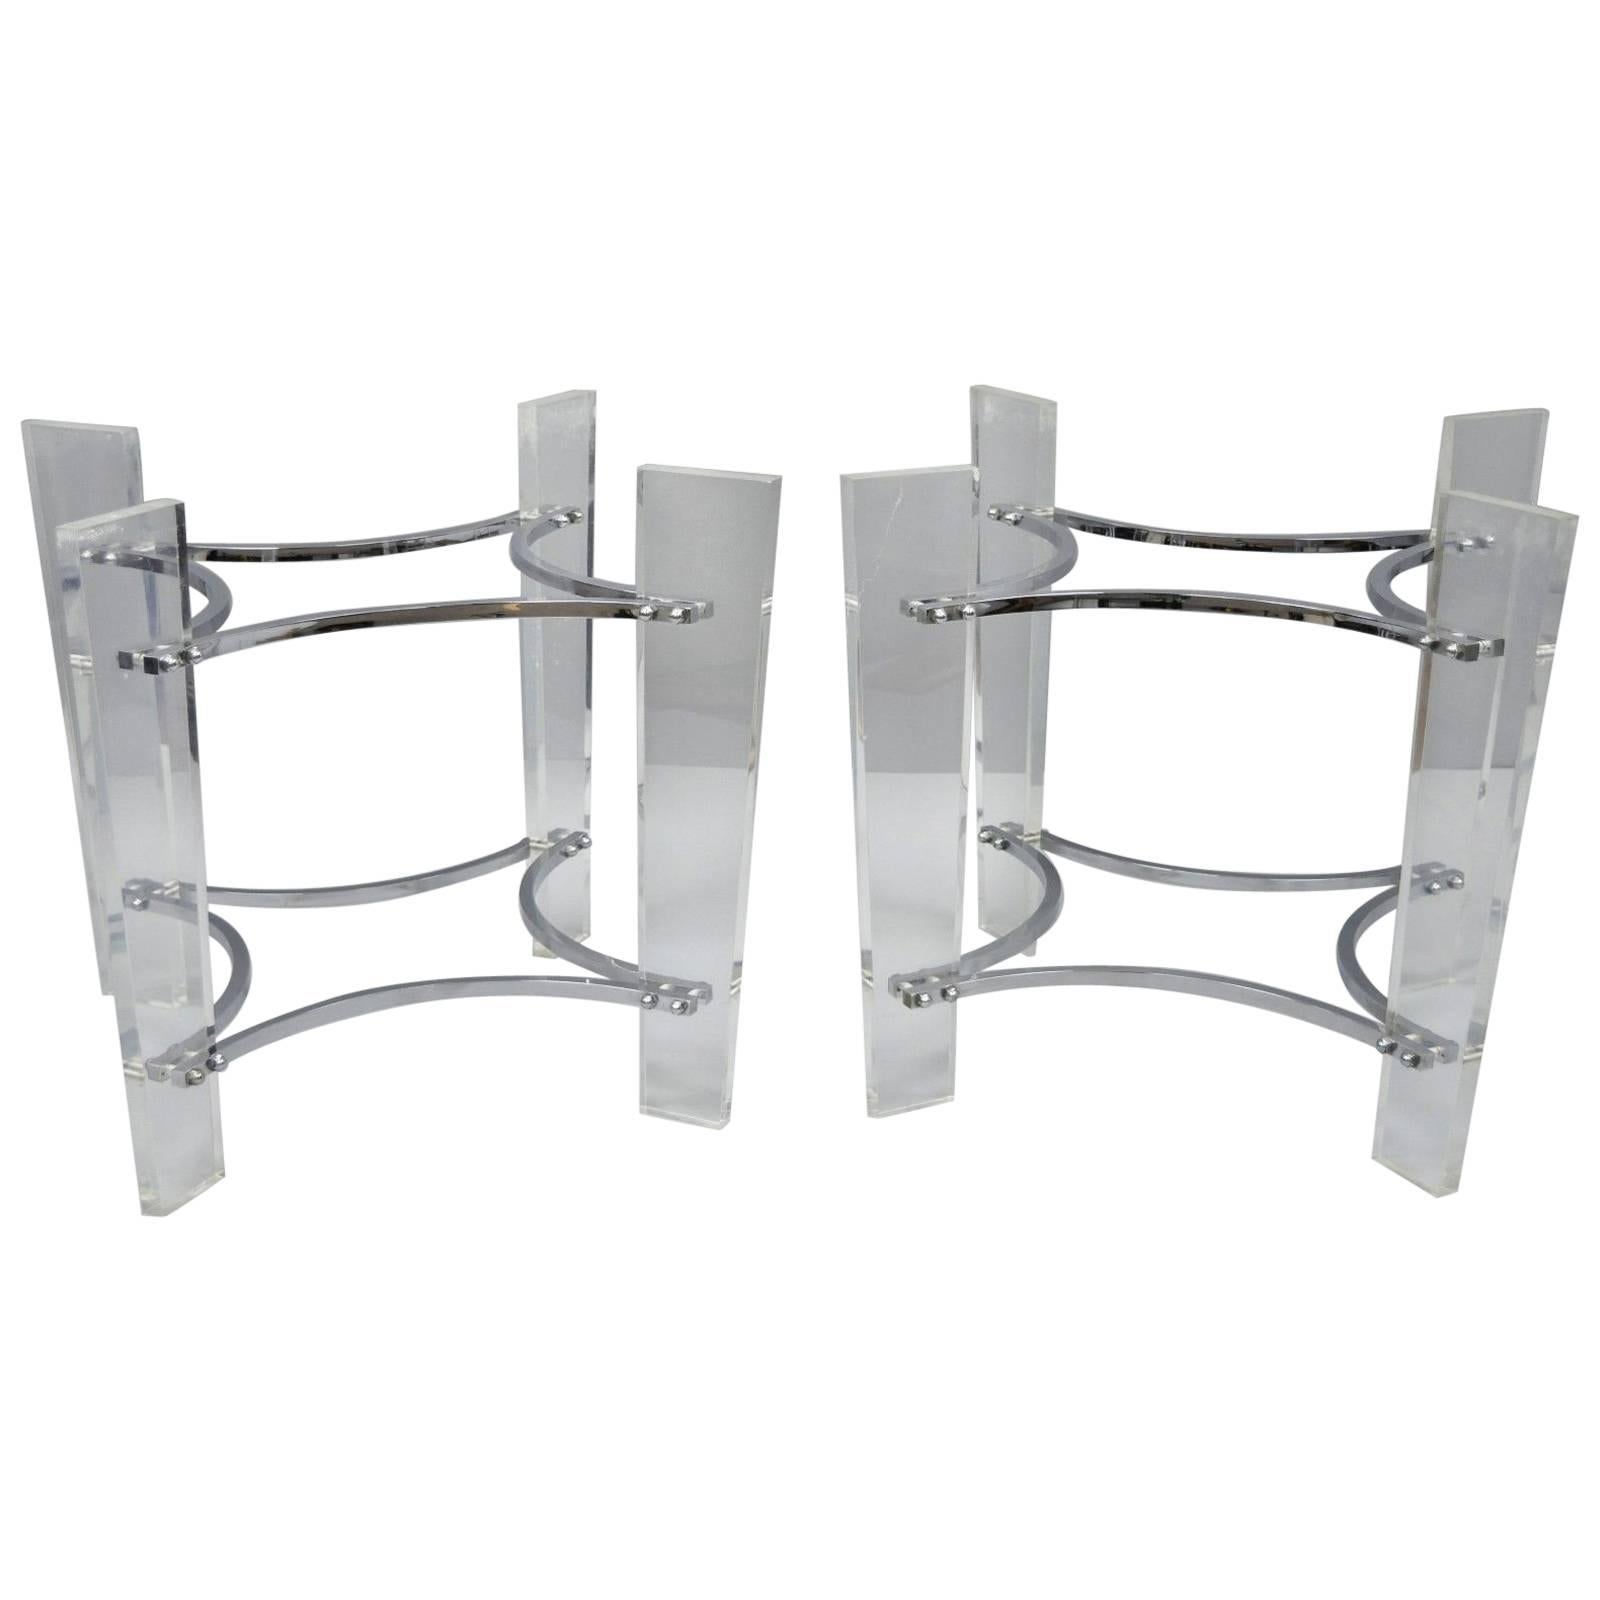 Pair of Lucite & Chrome Sculptural Mid-Century Modern End Table Bases For Sale